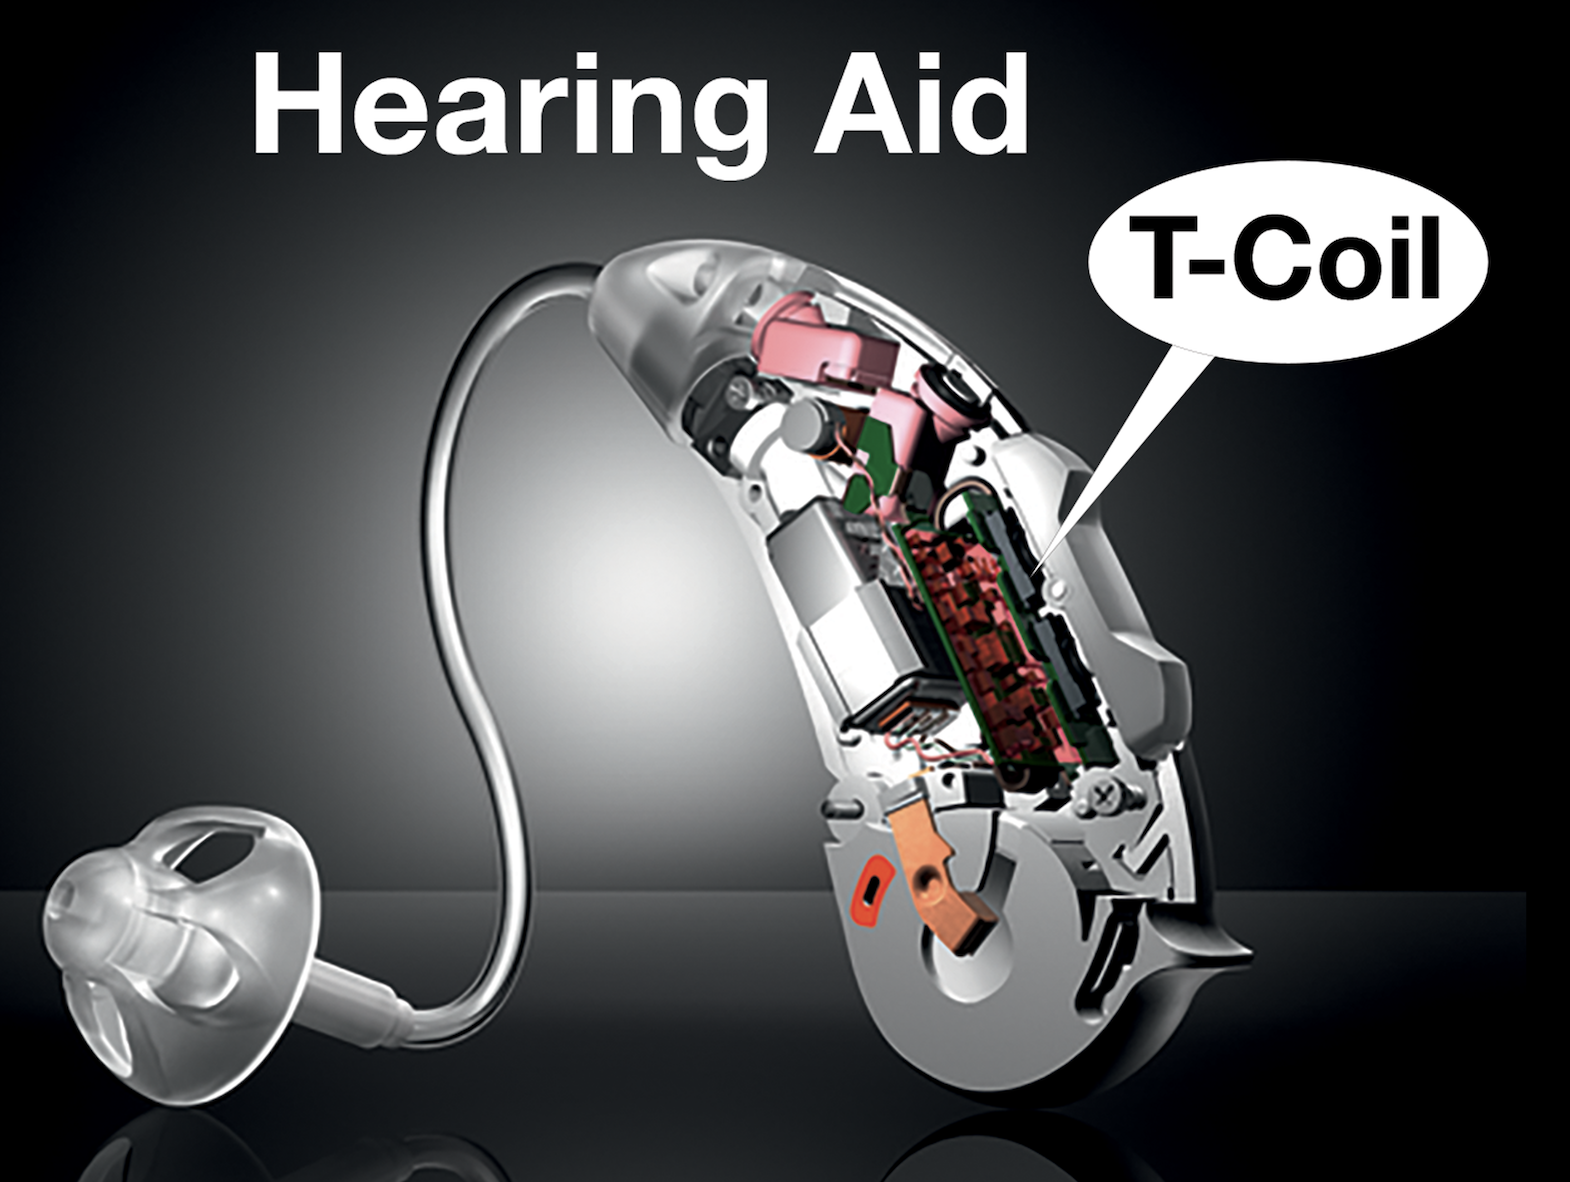 A hearing aid with a t-coil